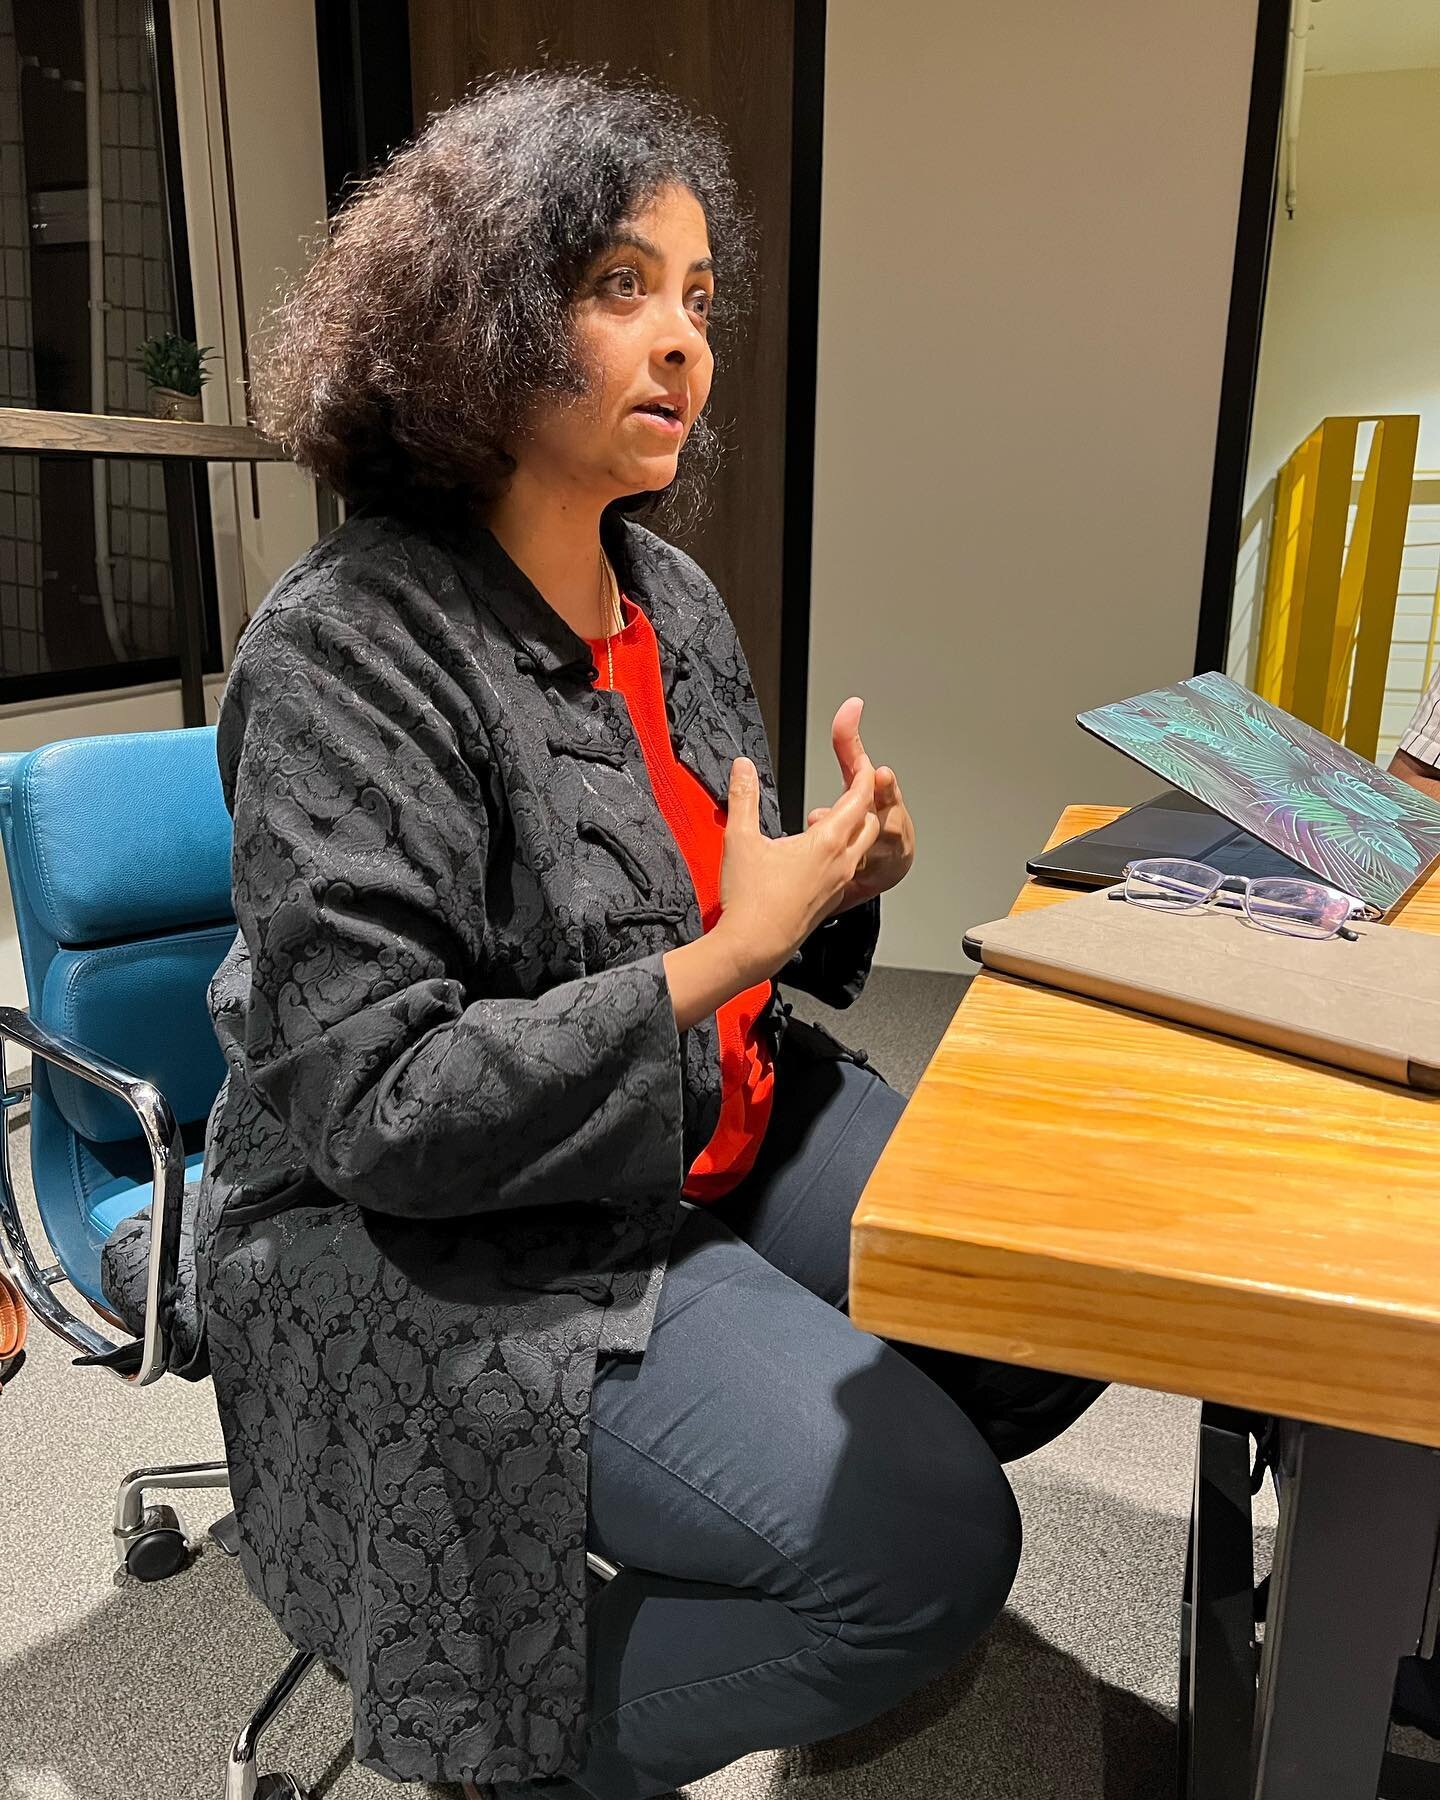 A fantastic lesson by Soundari Mukherjea⁩ on storytelling tonight at UXD Course.

She showed us how stories could be concise and bring what no facts or assertions could: motion, emotion, something to relate, retell, and retain. Good stories are preci